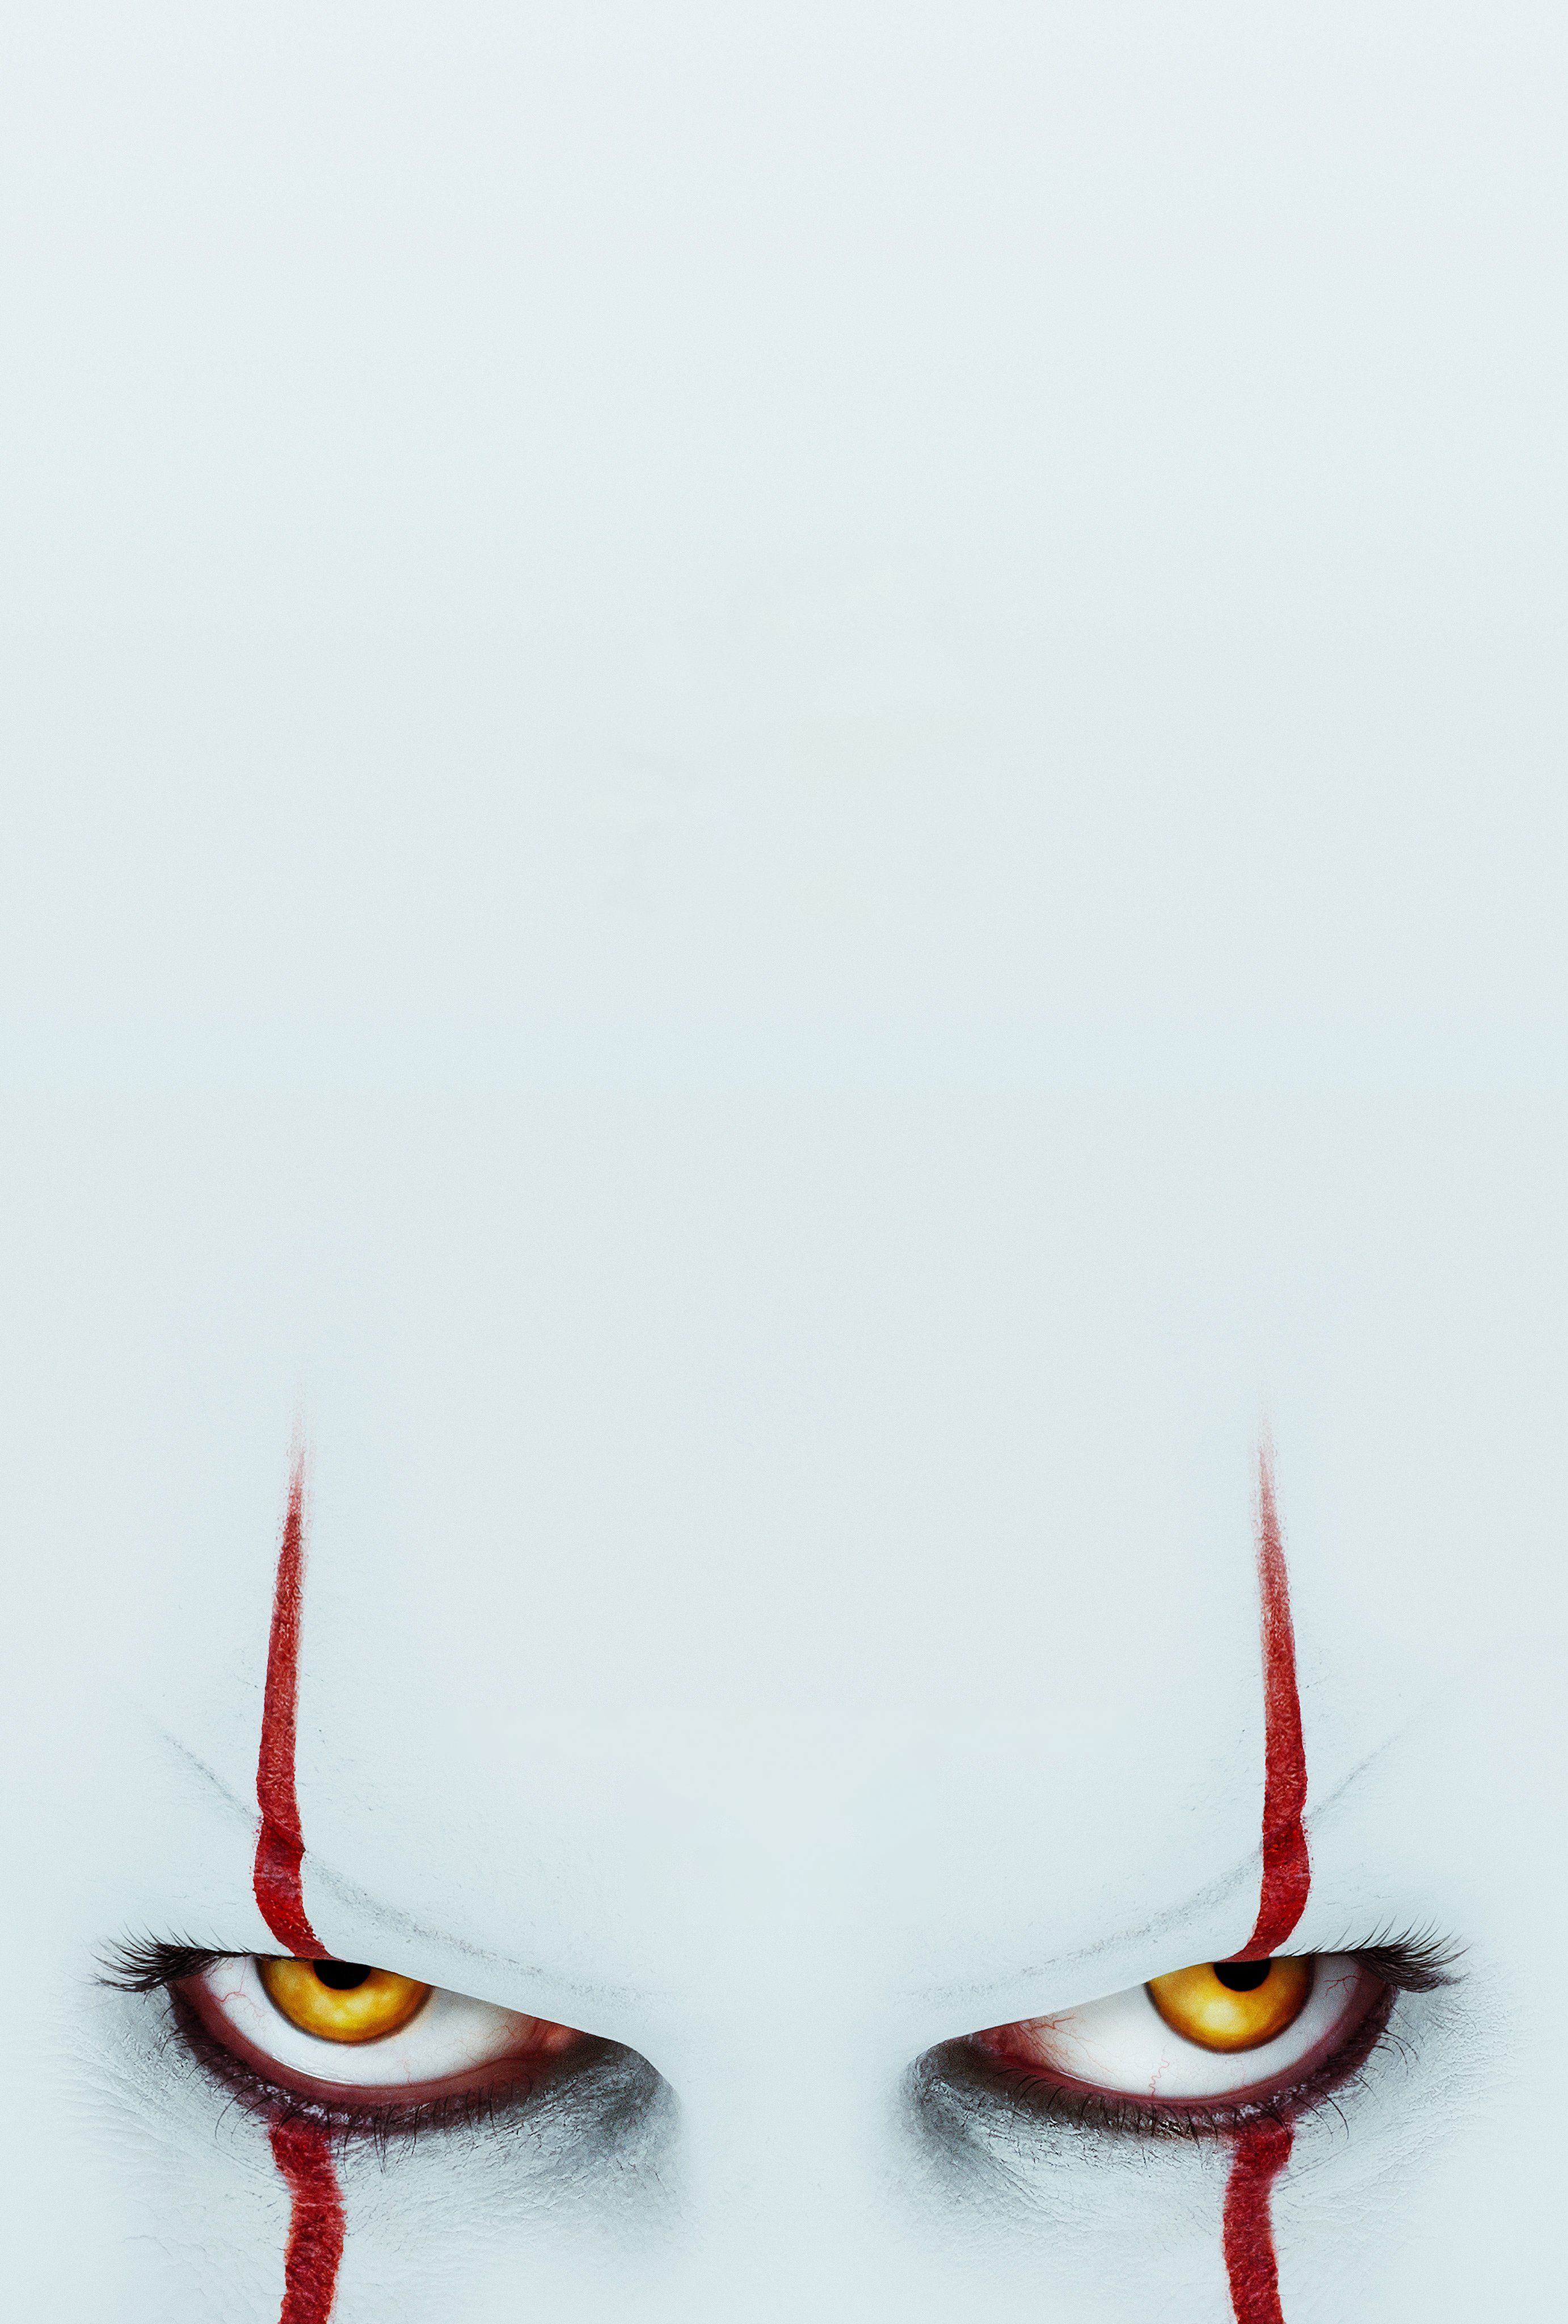 Here S A Super High Quality It Chapter Two Poster With No Text